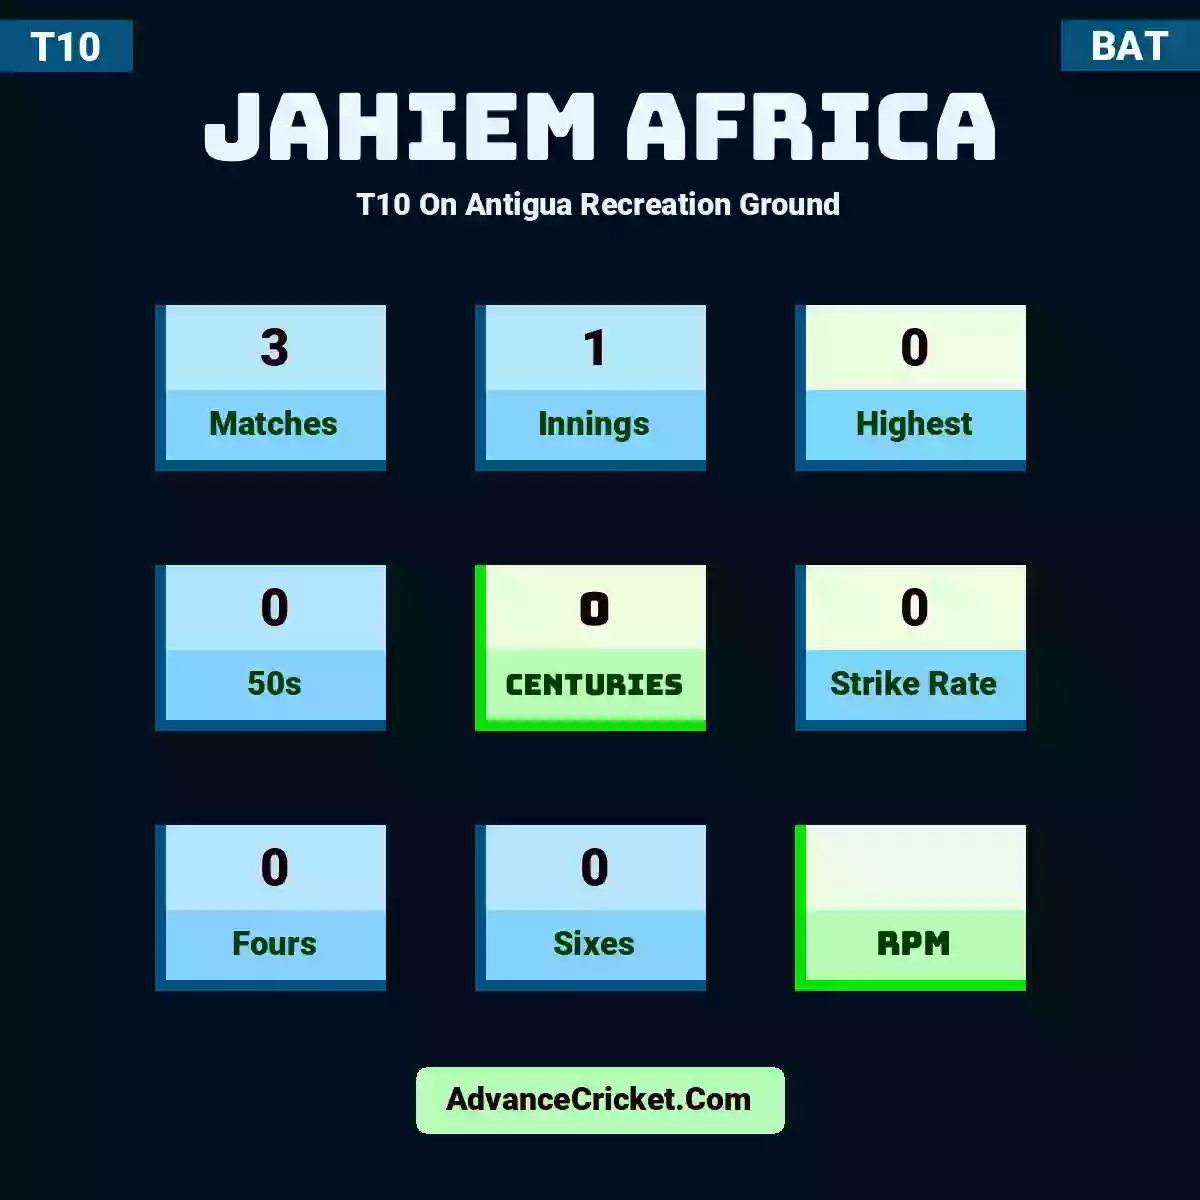 Jahiem Africa T10  On Antigua Recreation Ground, Jahiem Africa played 3 matches, scored 0 runs as highest, 0 half-centuries, and 0 centuries, with a strike rate of 0. J.Africa hit 0 fours and 0 sixes.